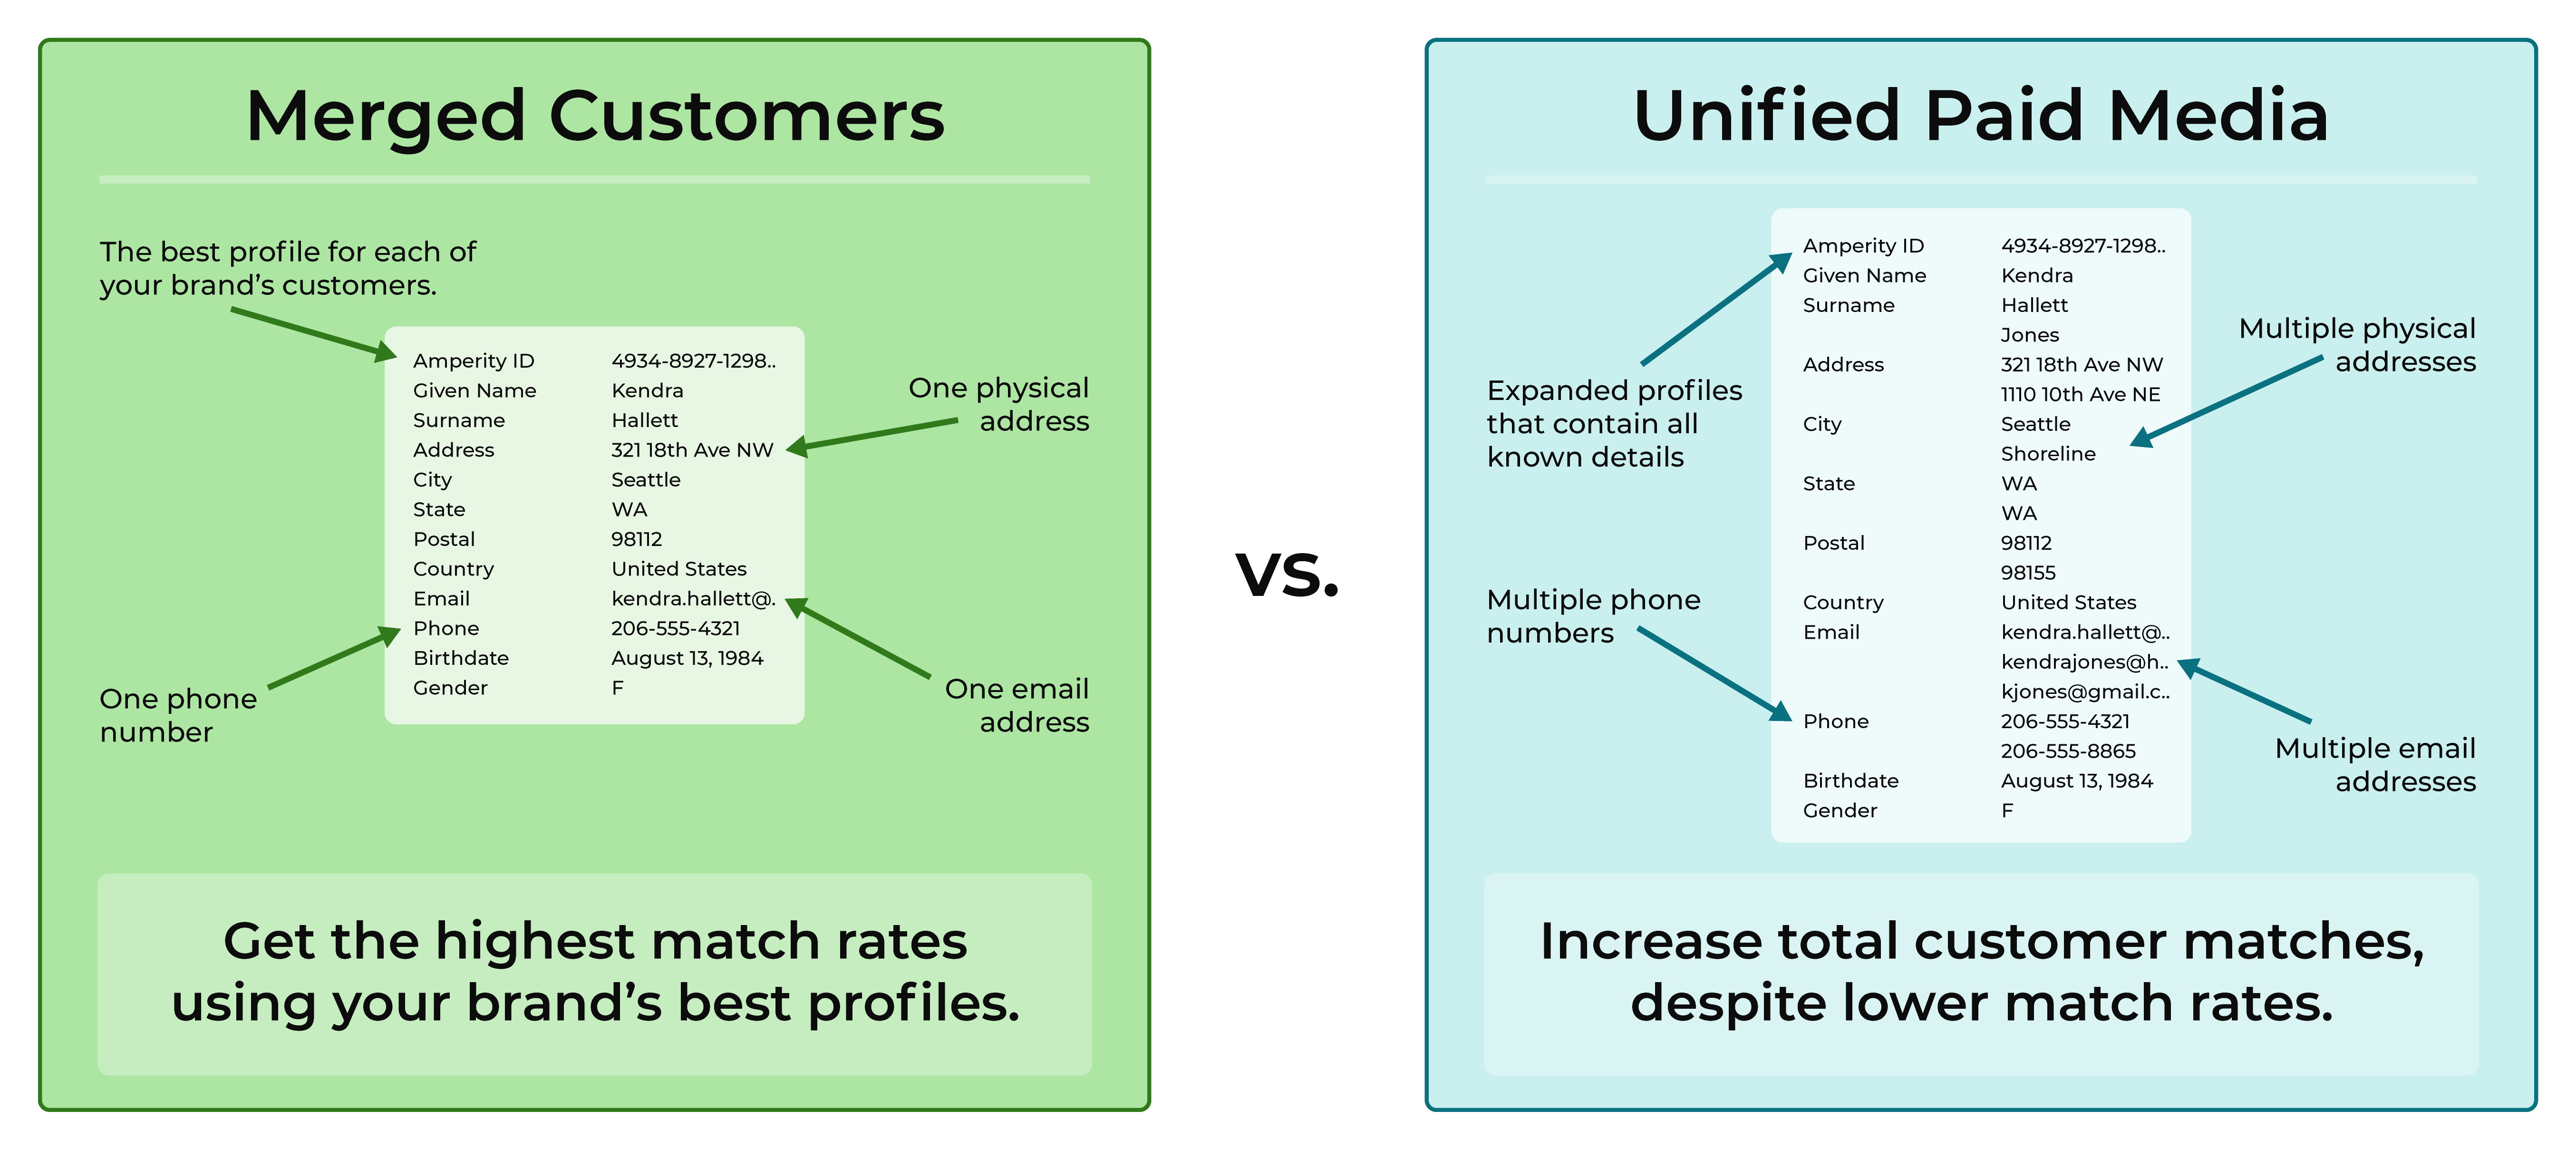 Should your brand use the Merged Customers or Unified Paid Media table?